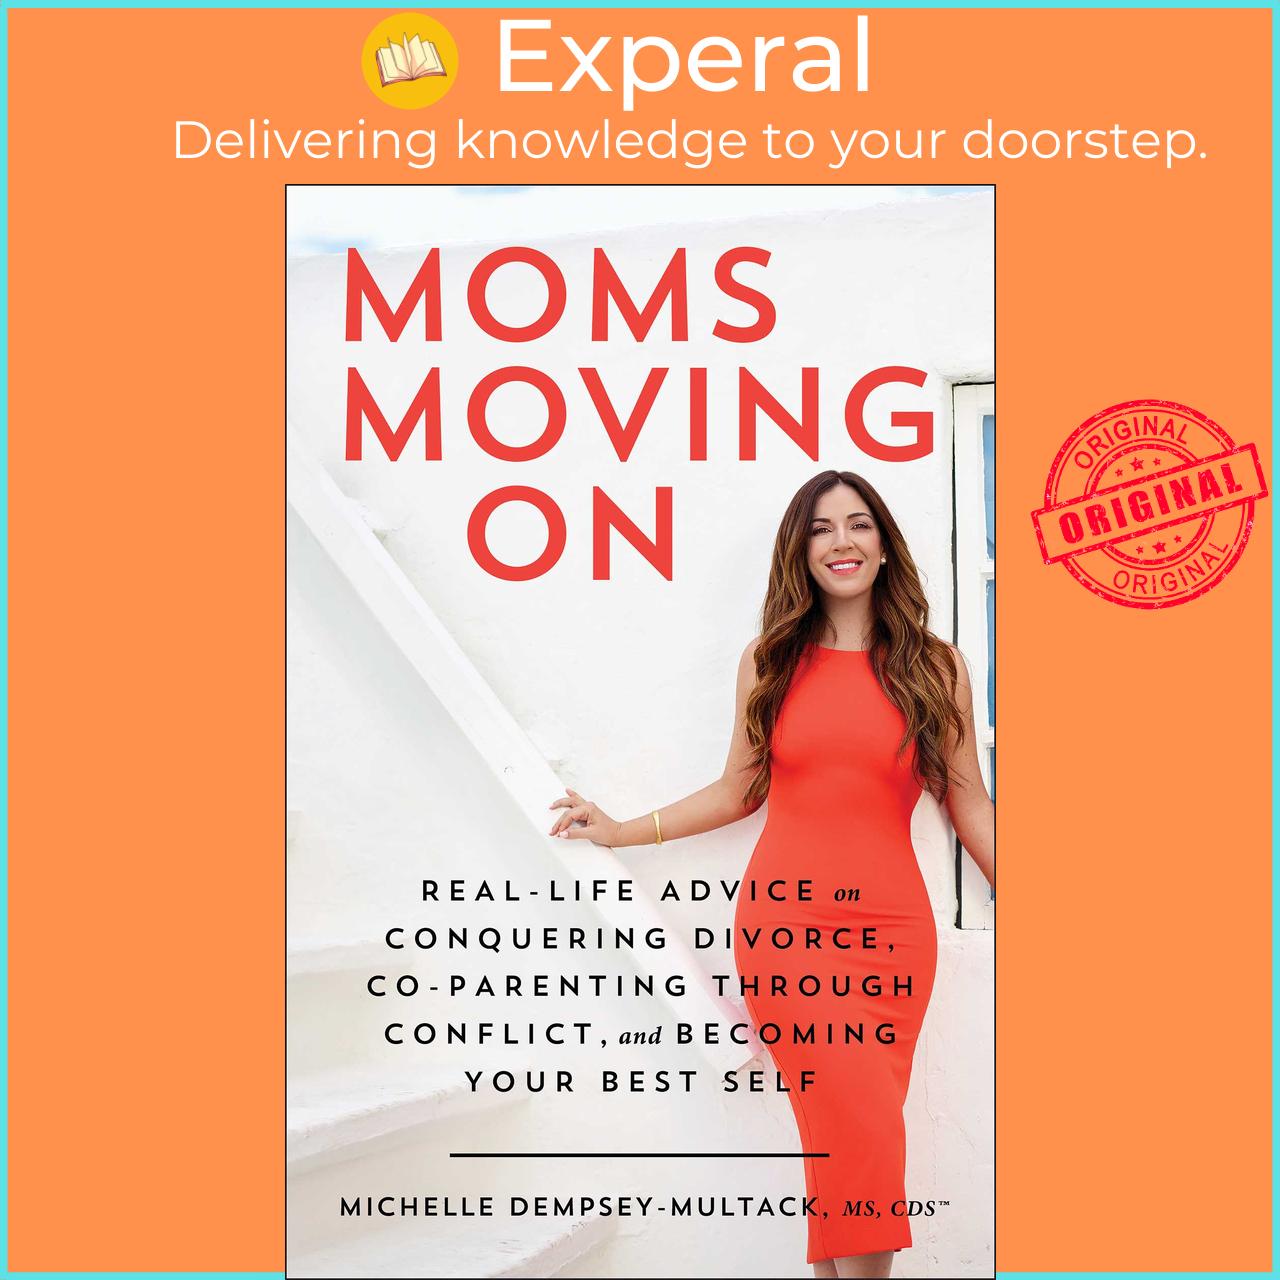 Sách - Moms Moving On - Real-Life Advice on Conquering Divorce, Co-P by Michelle Dempsey-Multack (US edition, paperback)